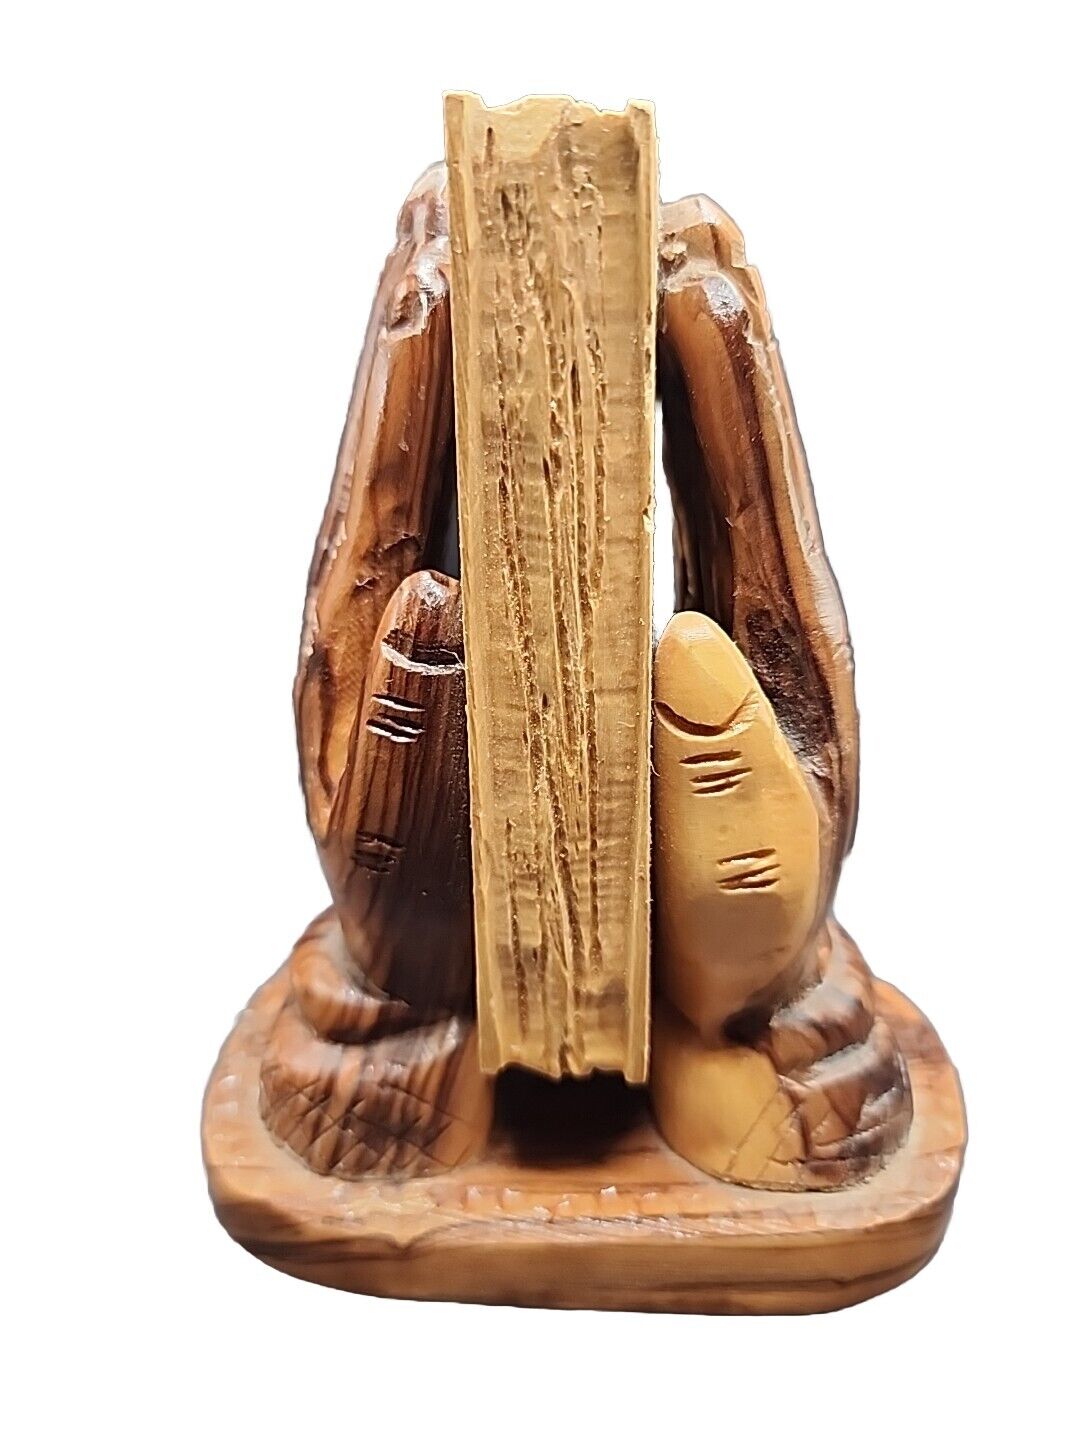 Carved Wood Praying Hands Holy Bible Religious Sculpture